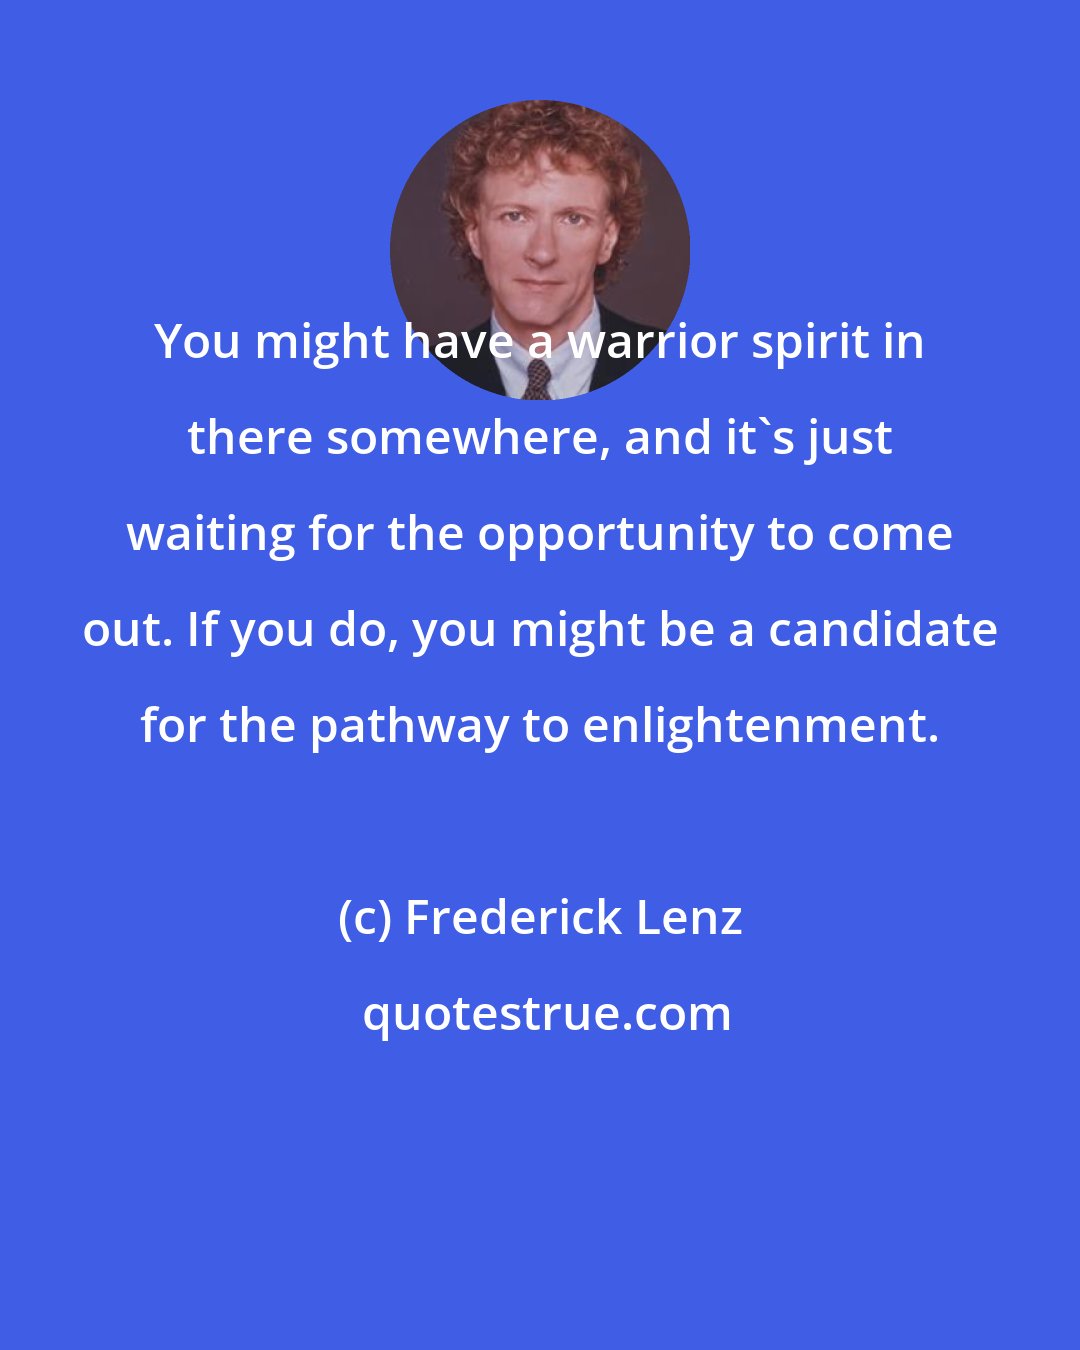 Frederick Lenz: You might have a warrior spirit in there somewhere, and it's just waiting for the opportunity to come out. If you do, you might be a candidate for the pathway to enlightenment.